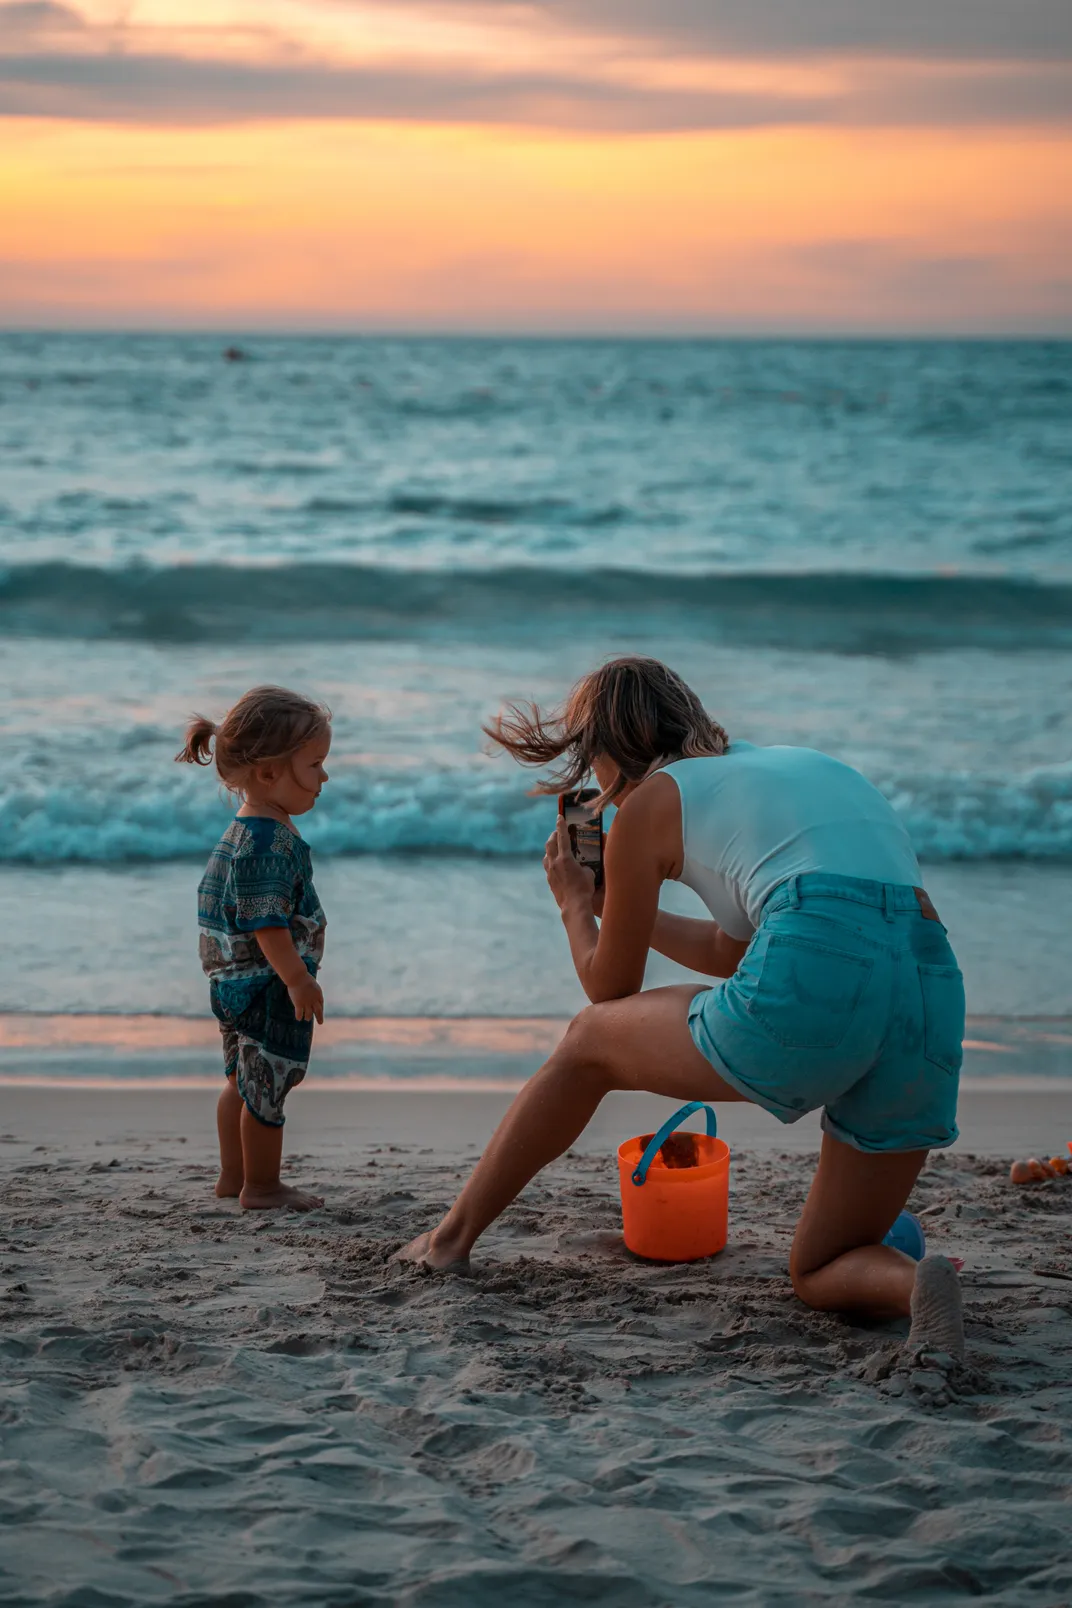 A mother snaps a photo of her young daughter on the beach at sunset.